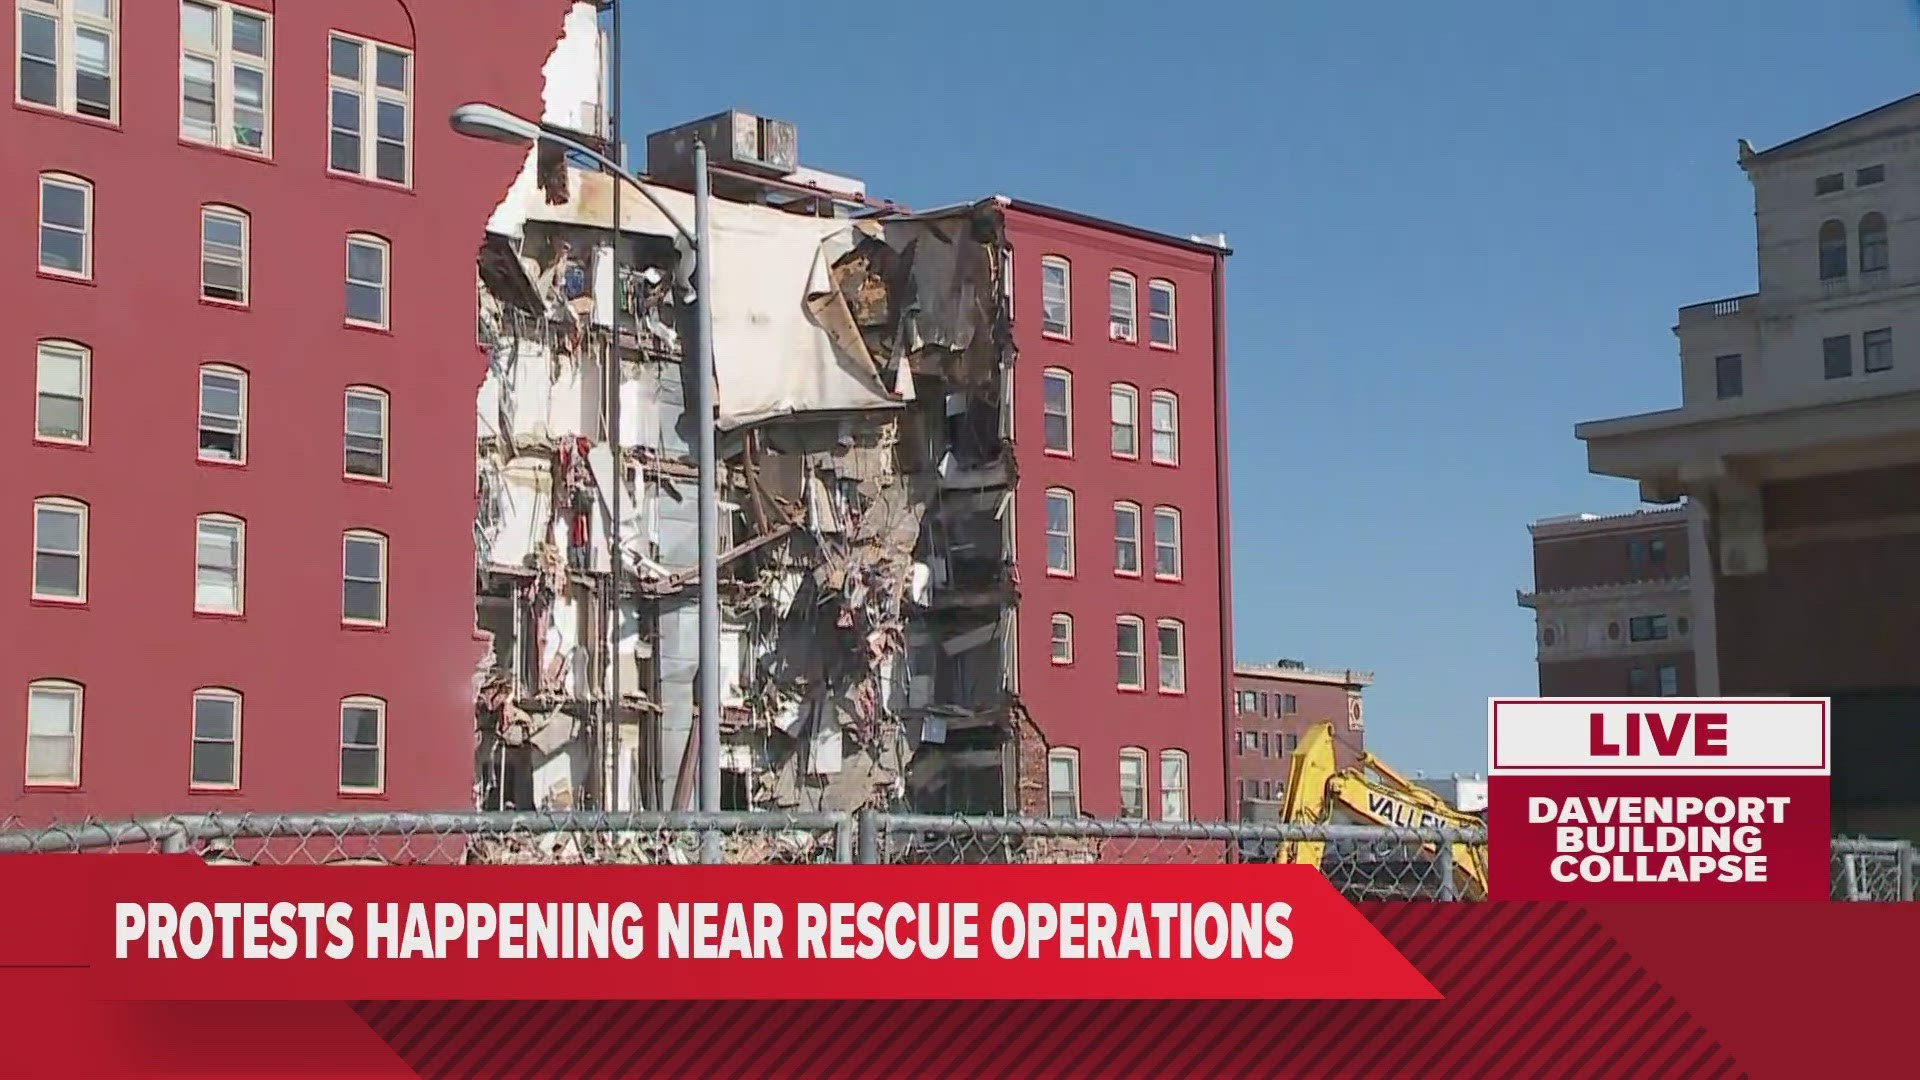 The demolition of the building was delayed after a woman was found alive in the rubble.